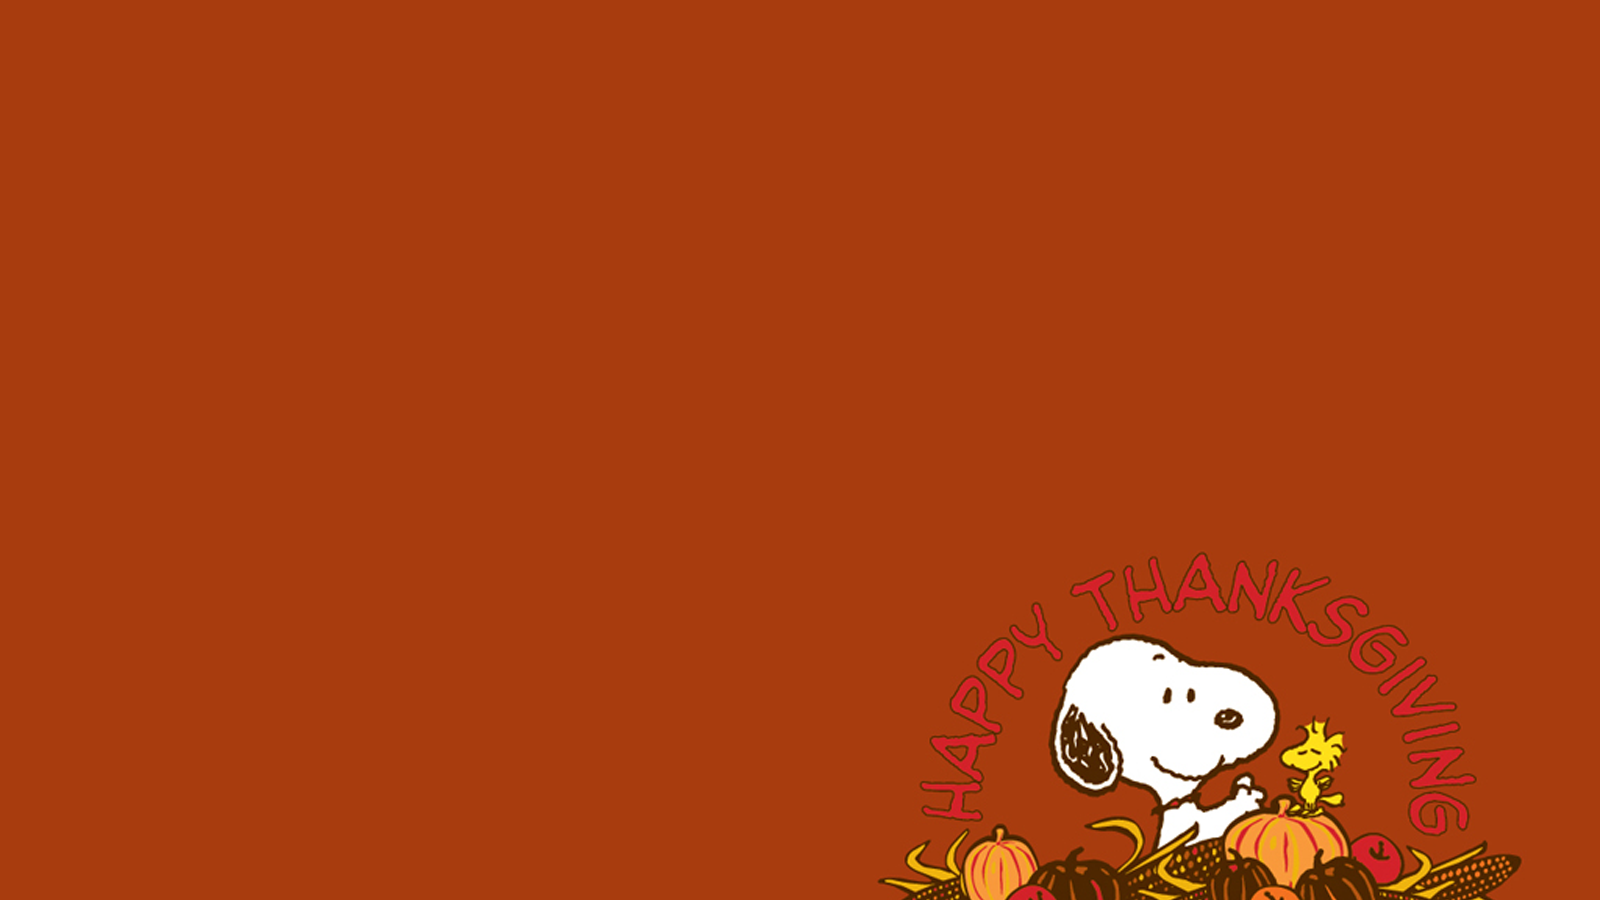 Free download Pics Gifs Photographs Peanuts Snoopy Thanksgiving wallpaper [1600x1200] for your Desktop, Mobile & Tablet. Explore Cute Thanksgiving Wallpaper. Cute Wallpaper for Laptops, Cute Wallpaper for Girls, Cute Wallpaper Tumblr